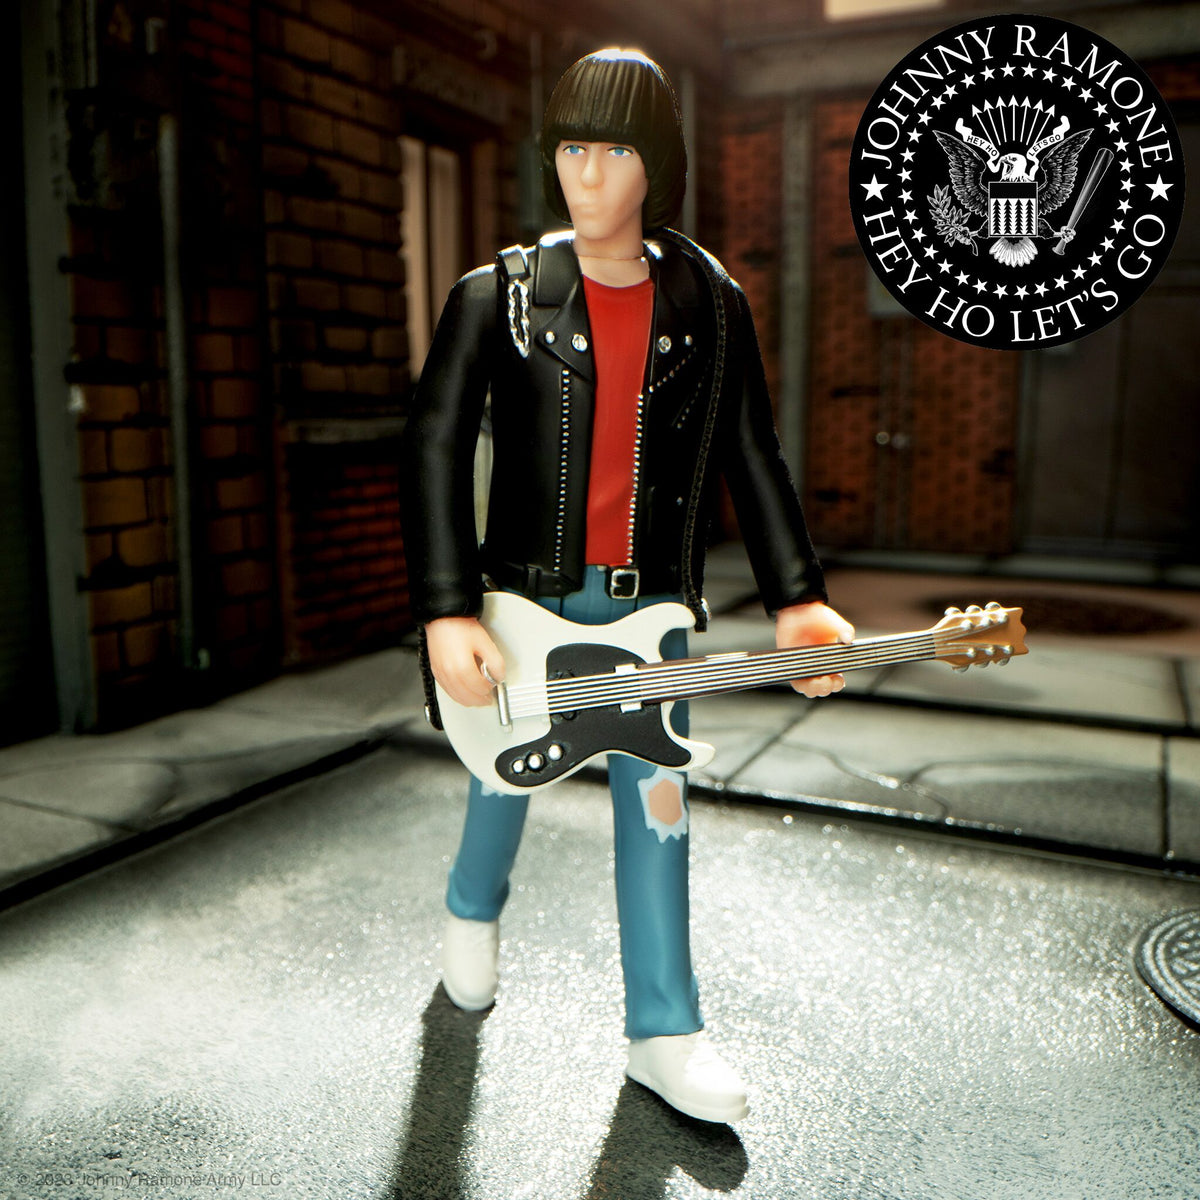 Johnny Ramone - Johnny Ramone W1 ReAction Figure Super7 *PUNCHED